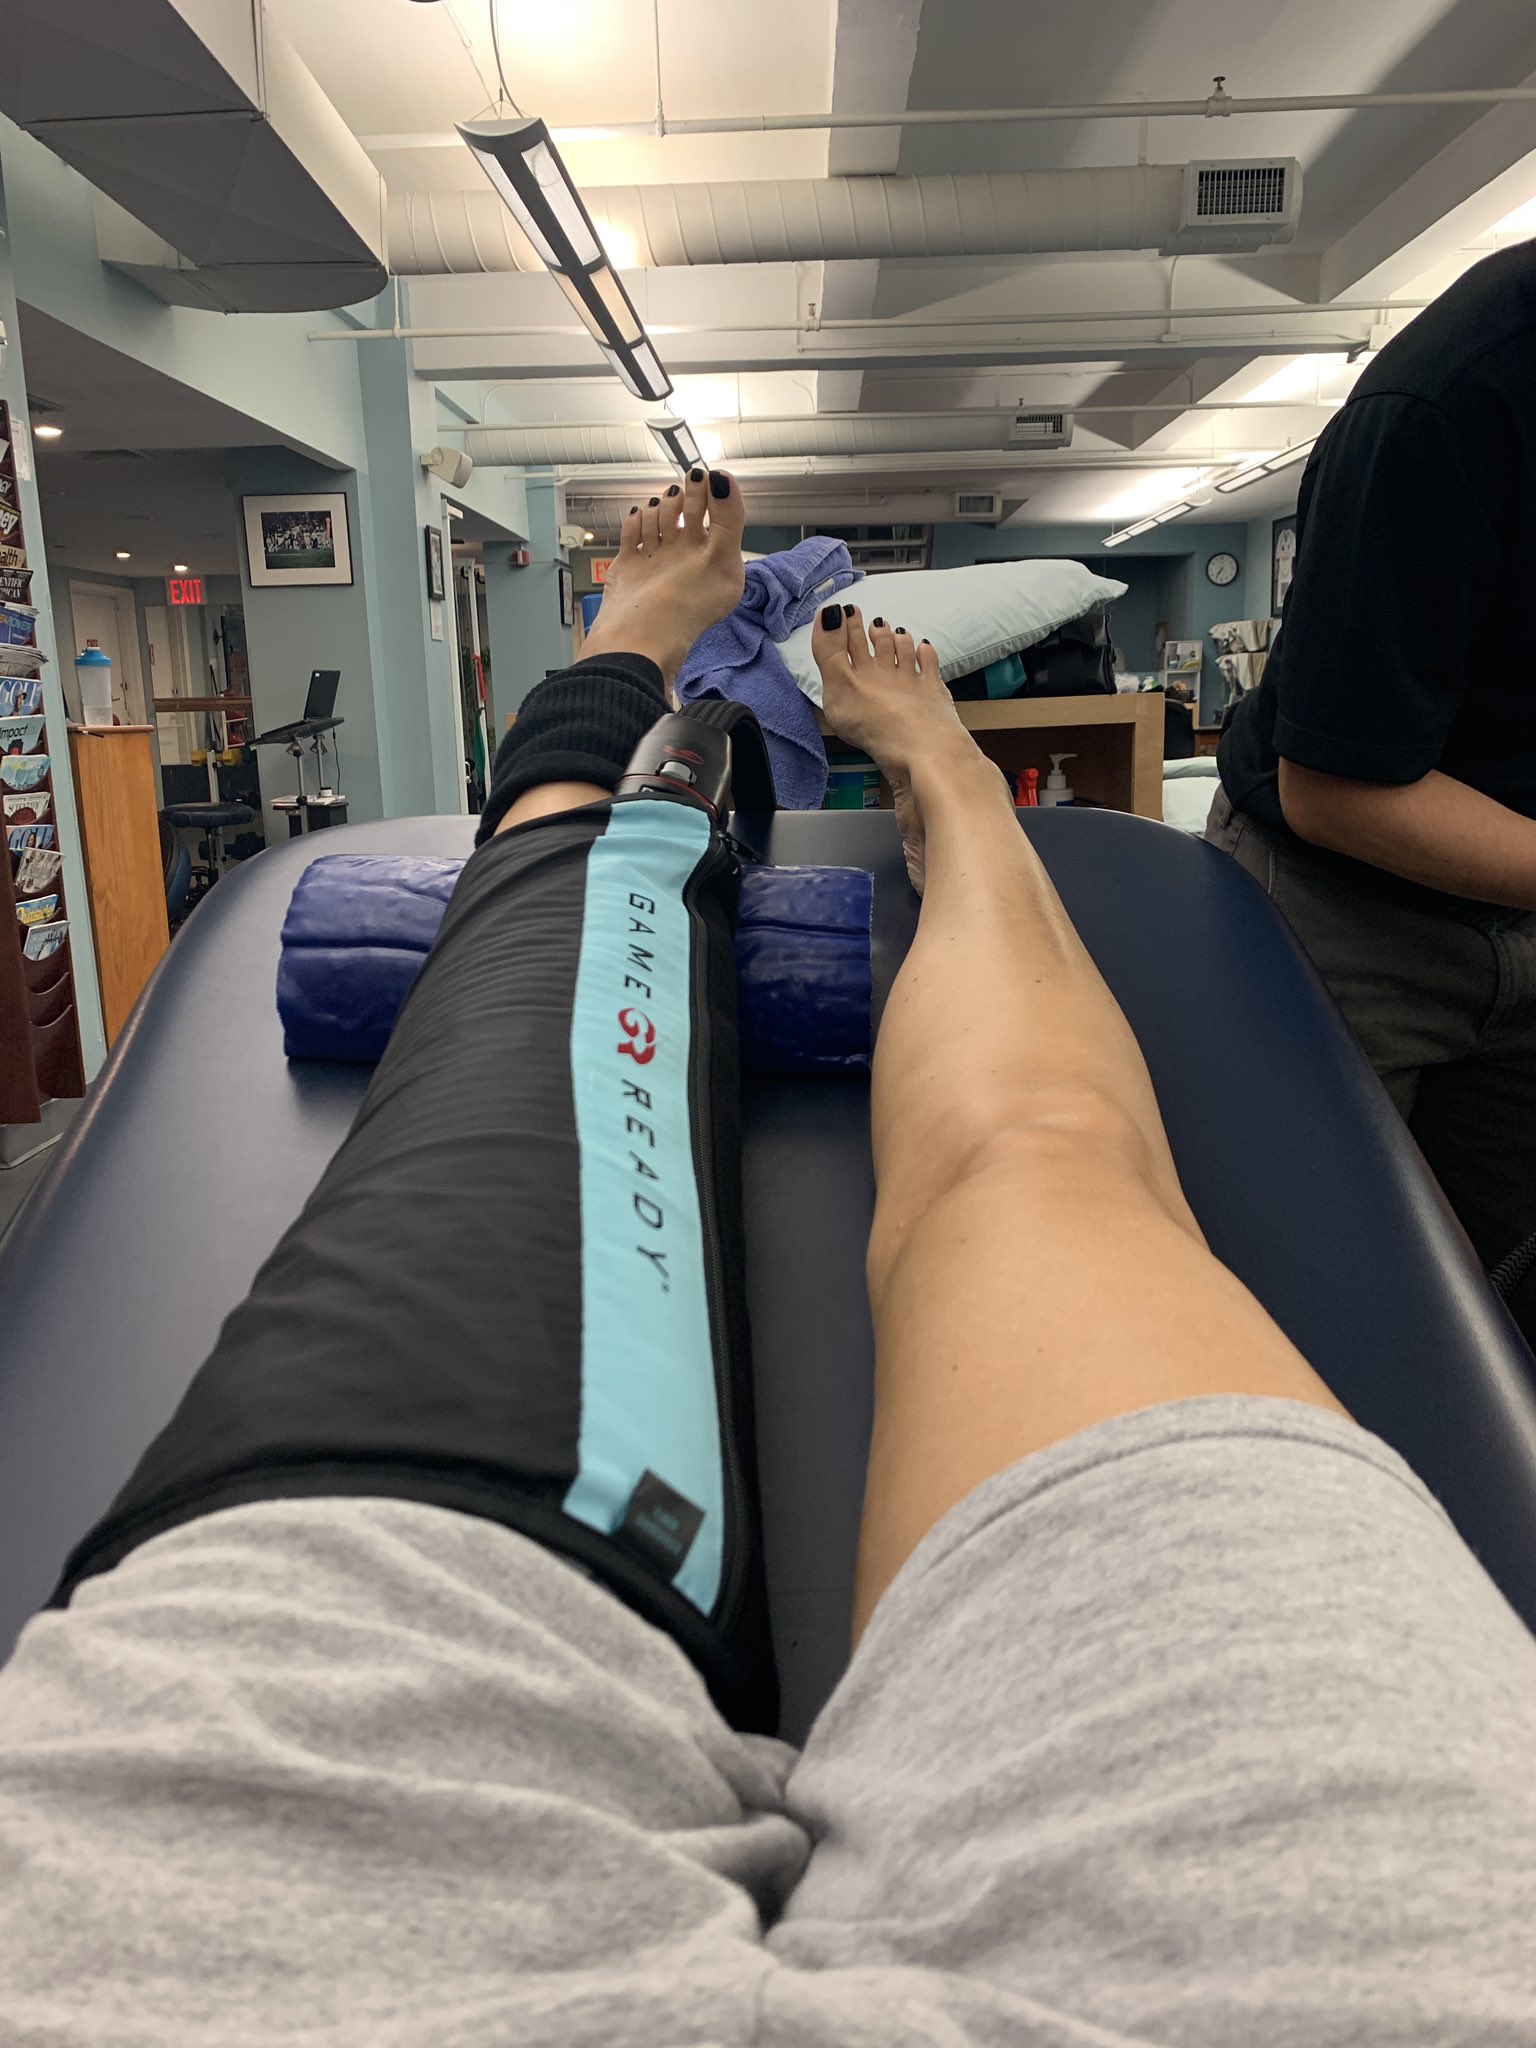 Julie Banderas On Twitter Just Finished Physical Therapy With The 